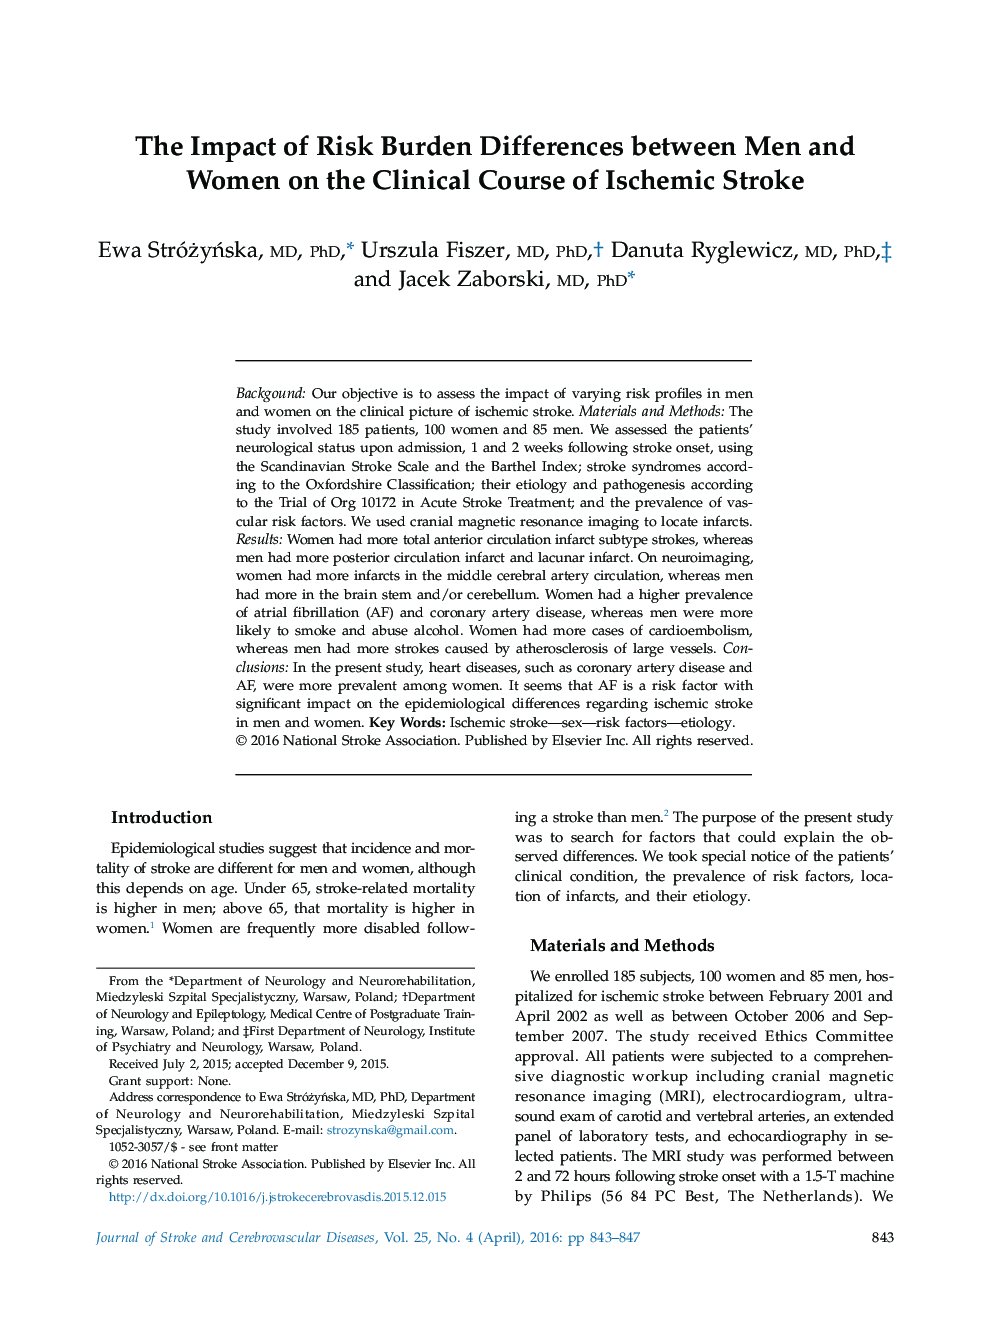 The Impact of Risk Burden Differences between Men and Women on the Clinical Course of Ischemic Stroke 